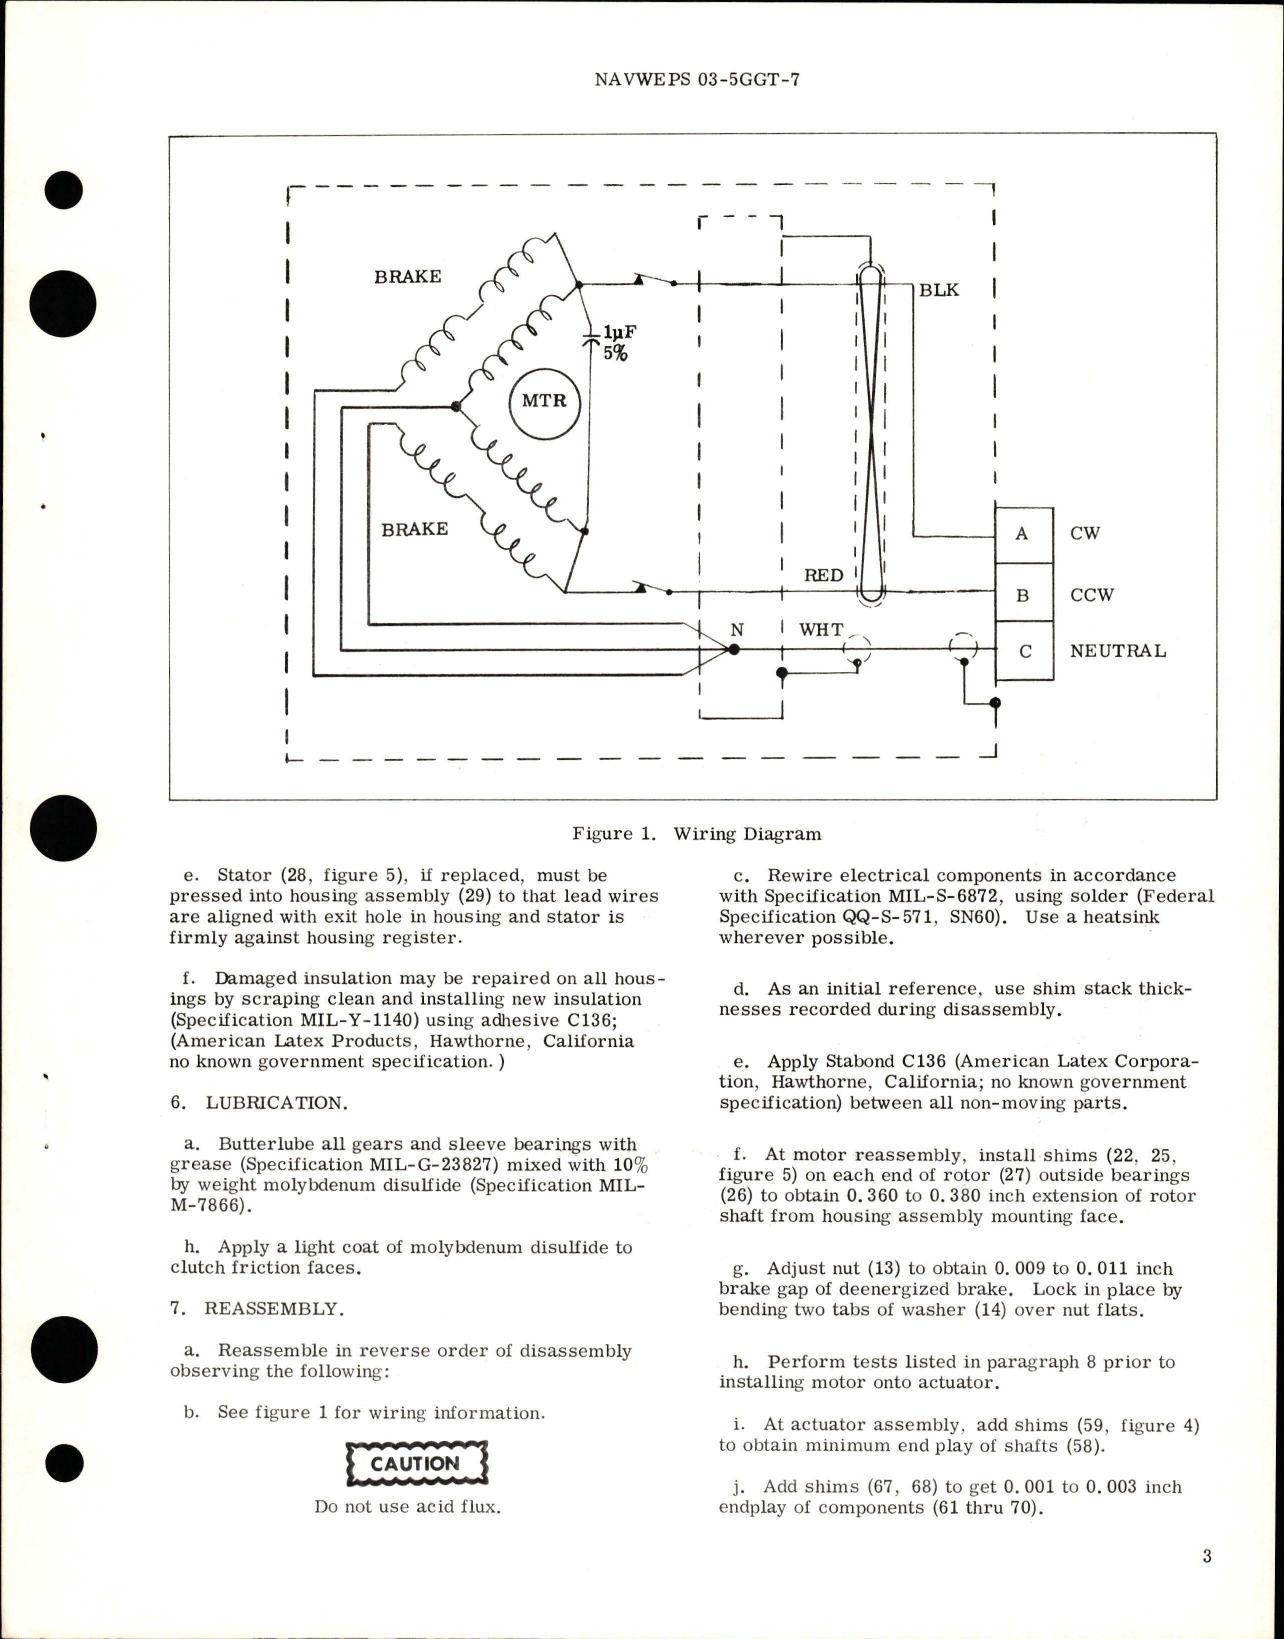 Sample page 5 from AirCorps Library document: Overhaul Instructions with Parts Breakdown for Electromechanical Rotary Actuator - Part 1021T100